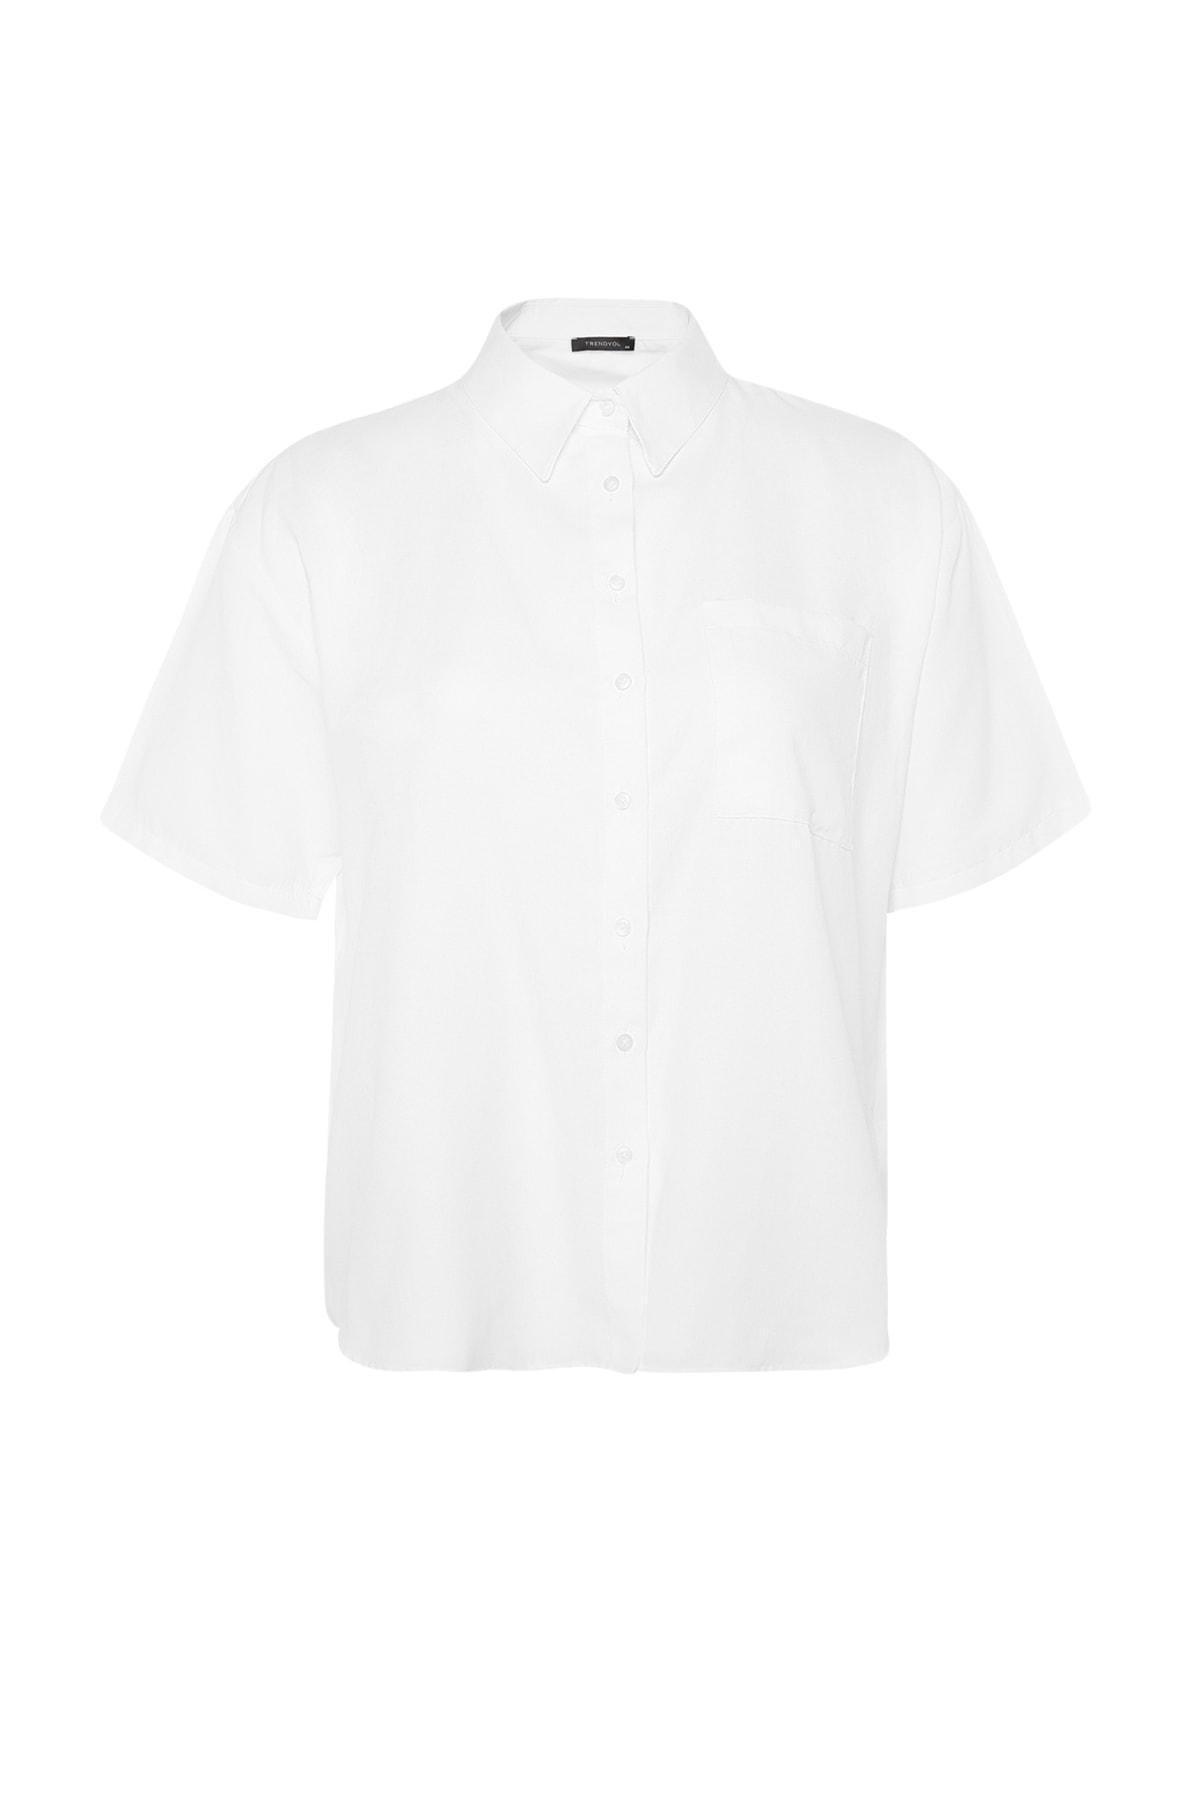 Trendyol - White Relaxed Plus Size Shirt